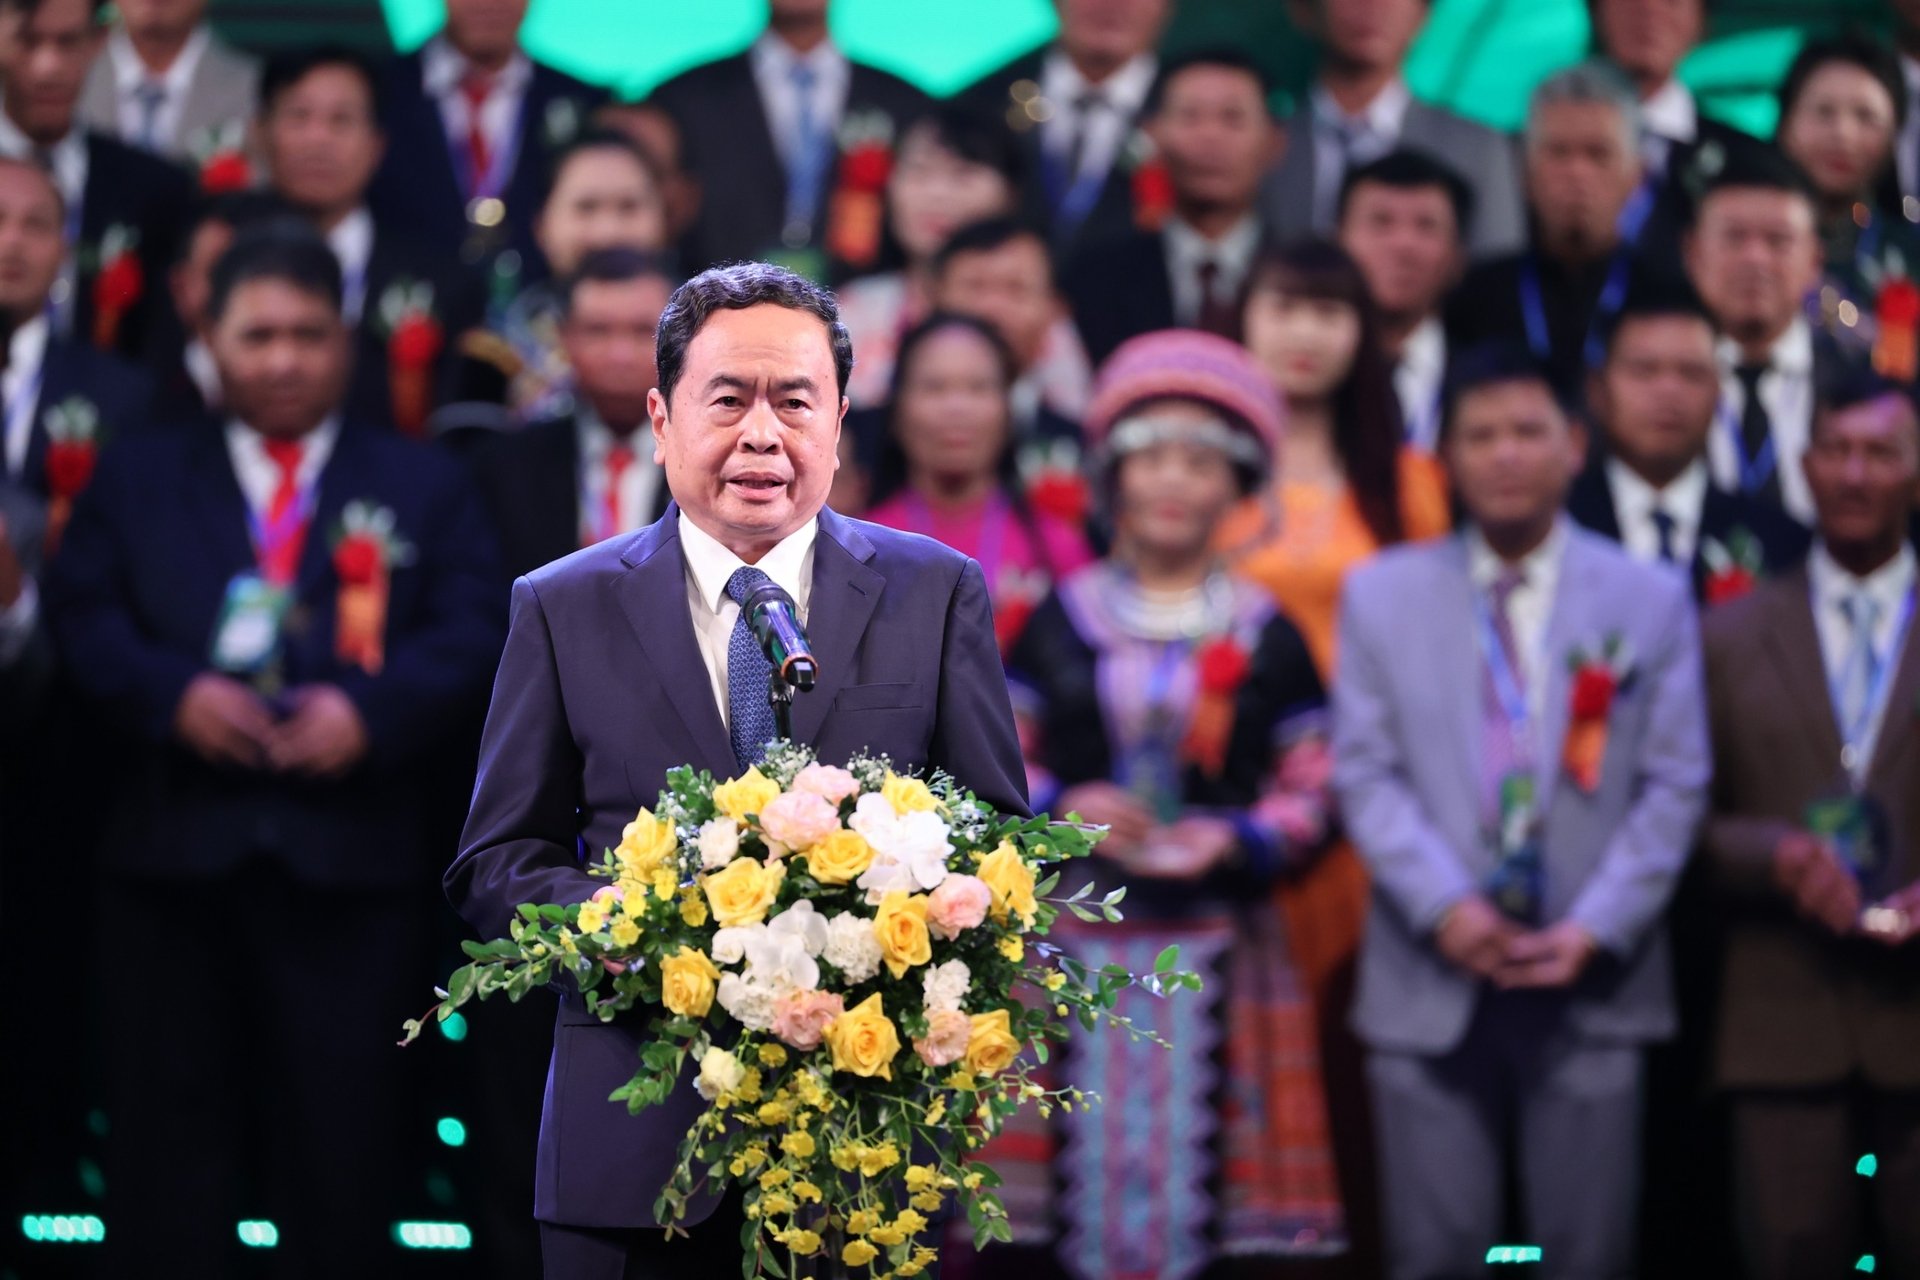 Standing Vice Chairman of the National Assembly, Tran Thanh Man, expressed 5 wishes for farmers and associations at all levels.